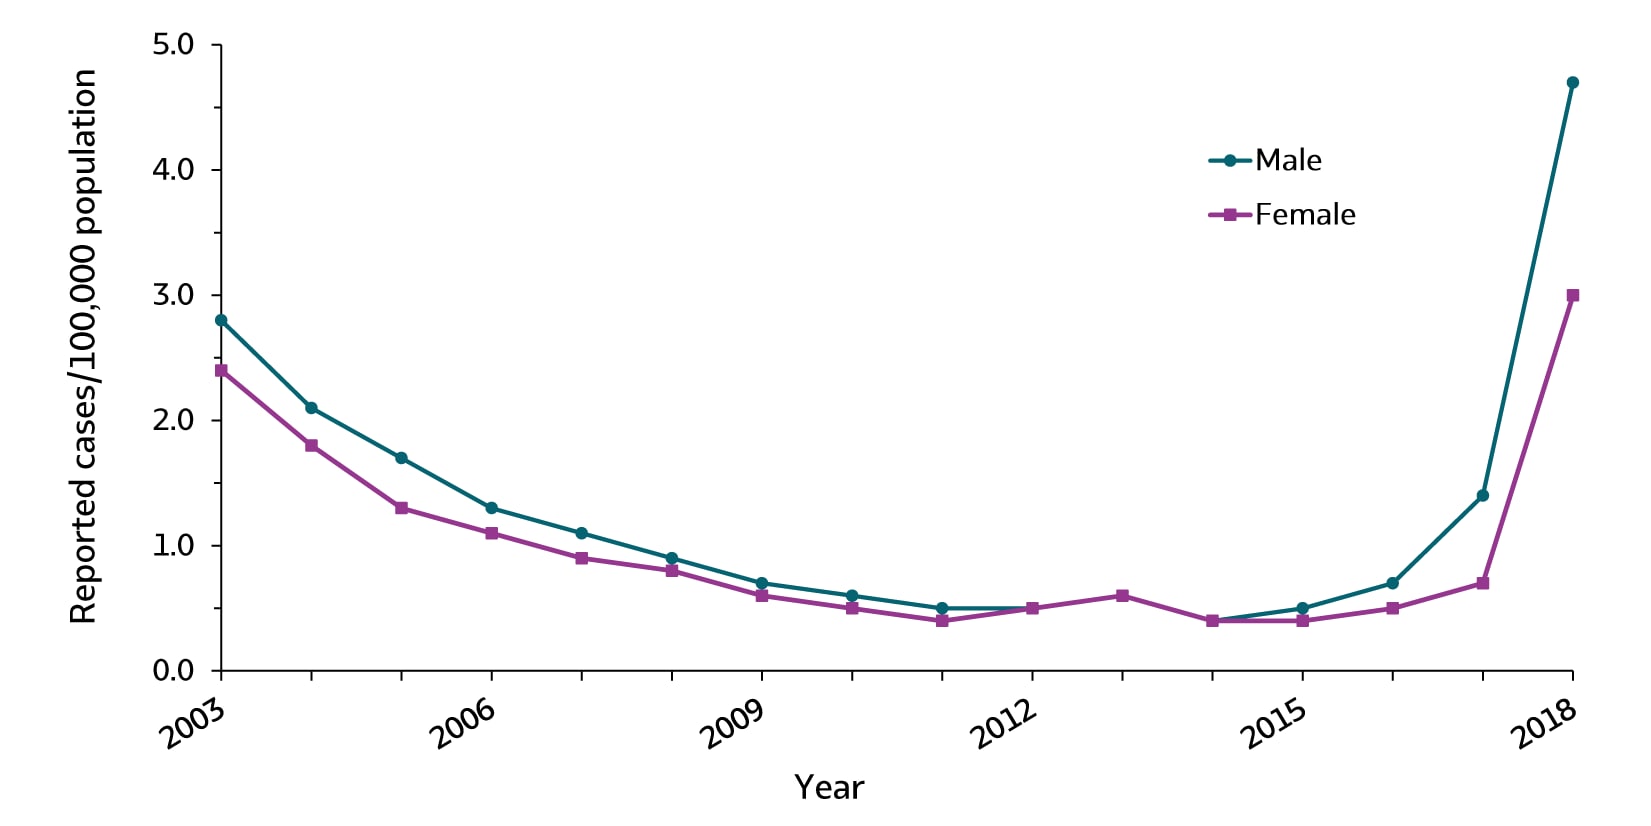 Figure 1.5.  The line graph shows trends in rates of hepatitis A for males and females from 2003 through 2018. Rates for males and females declined from 2003 through 2011 and remained constant through 2015. Rates increased from 2016 through 2018, with the largest increase from 2017 to 2018.  Rates for males were higher than rates for females for all years except 2012 through 2014, when the rates were equal.